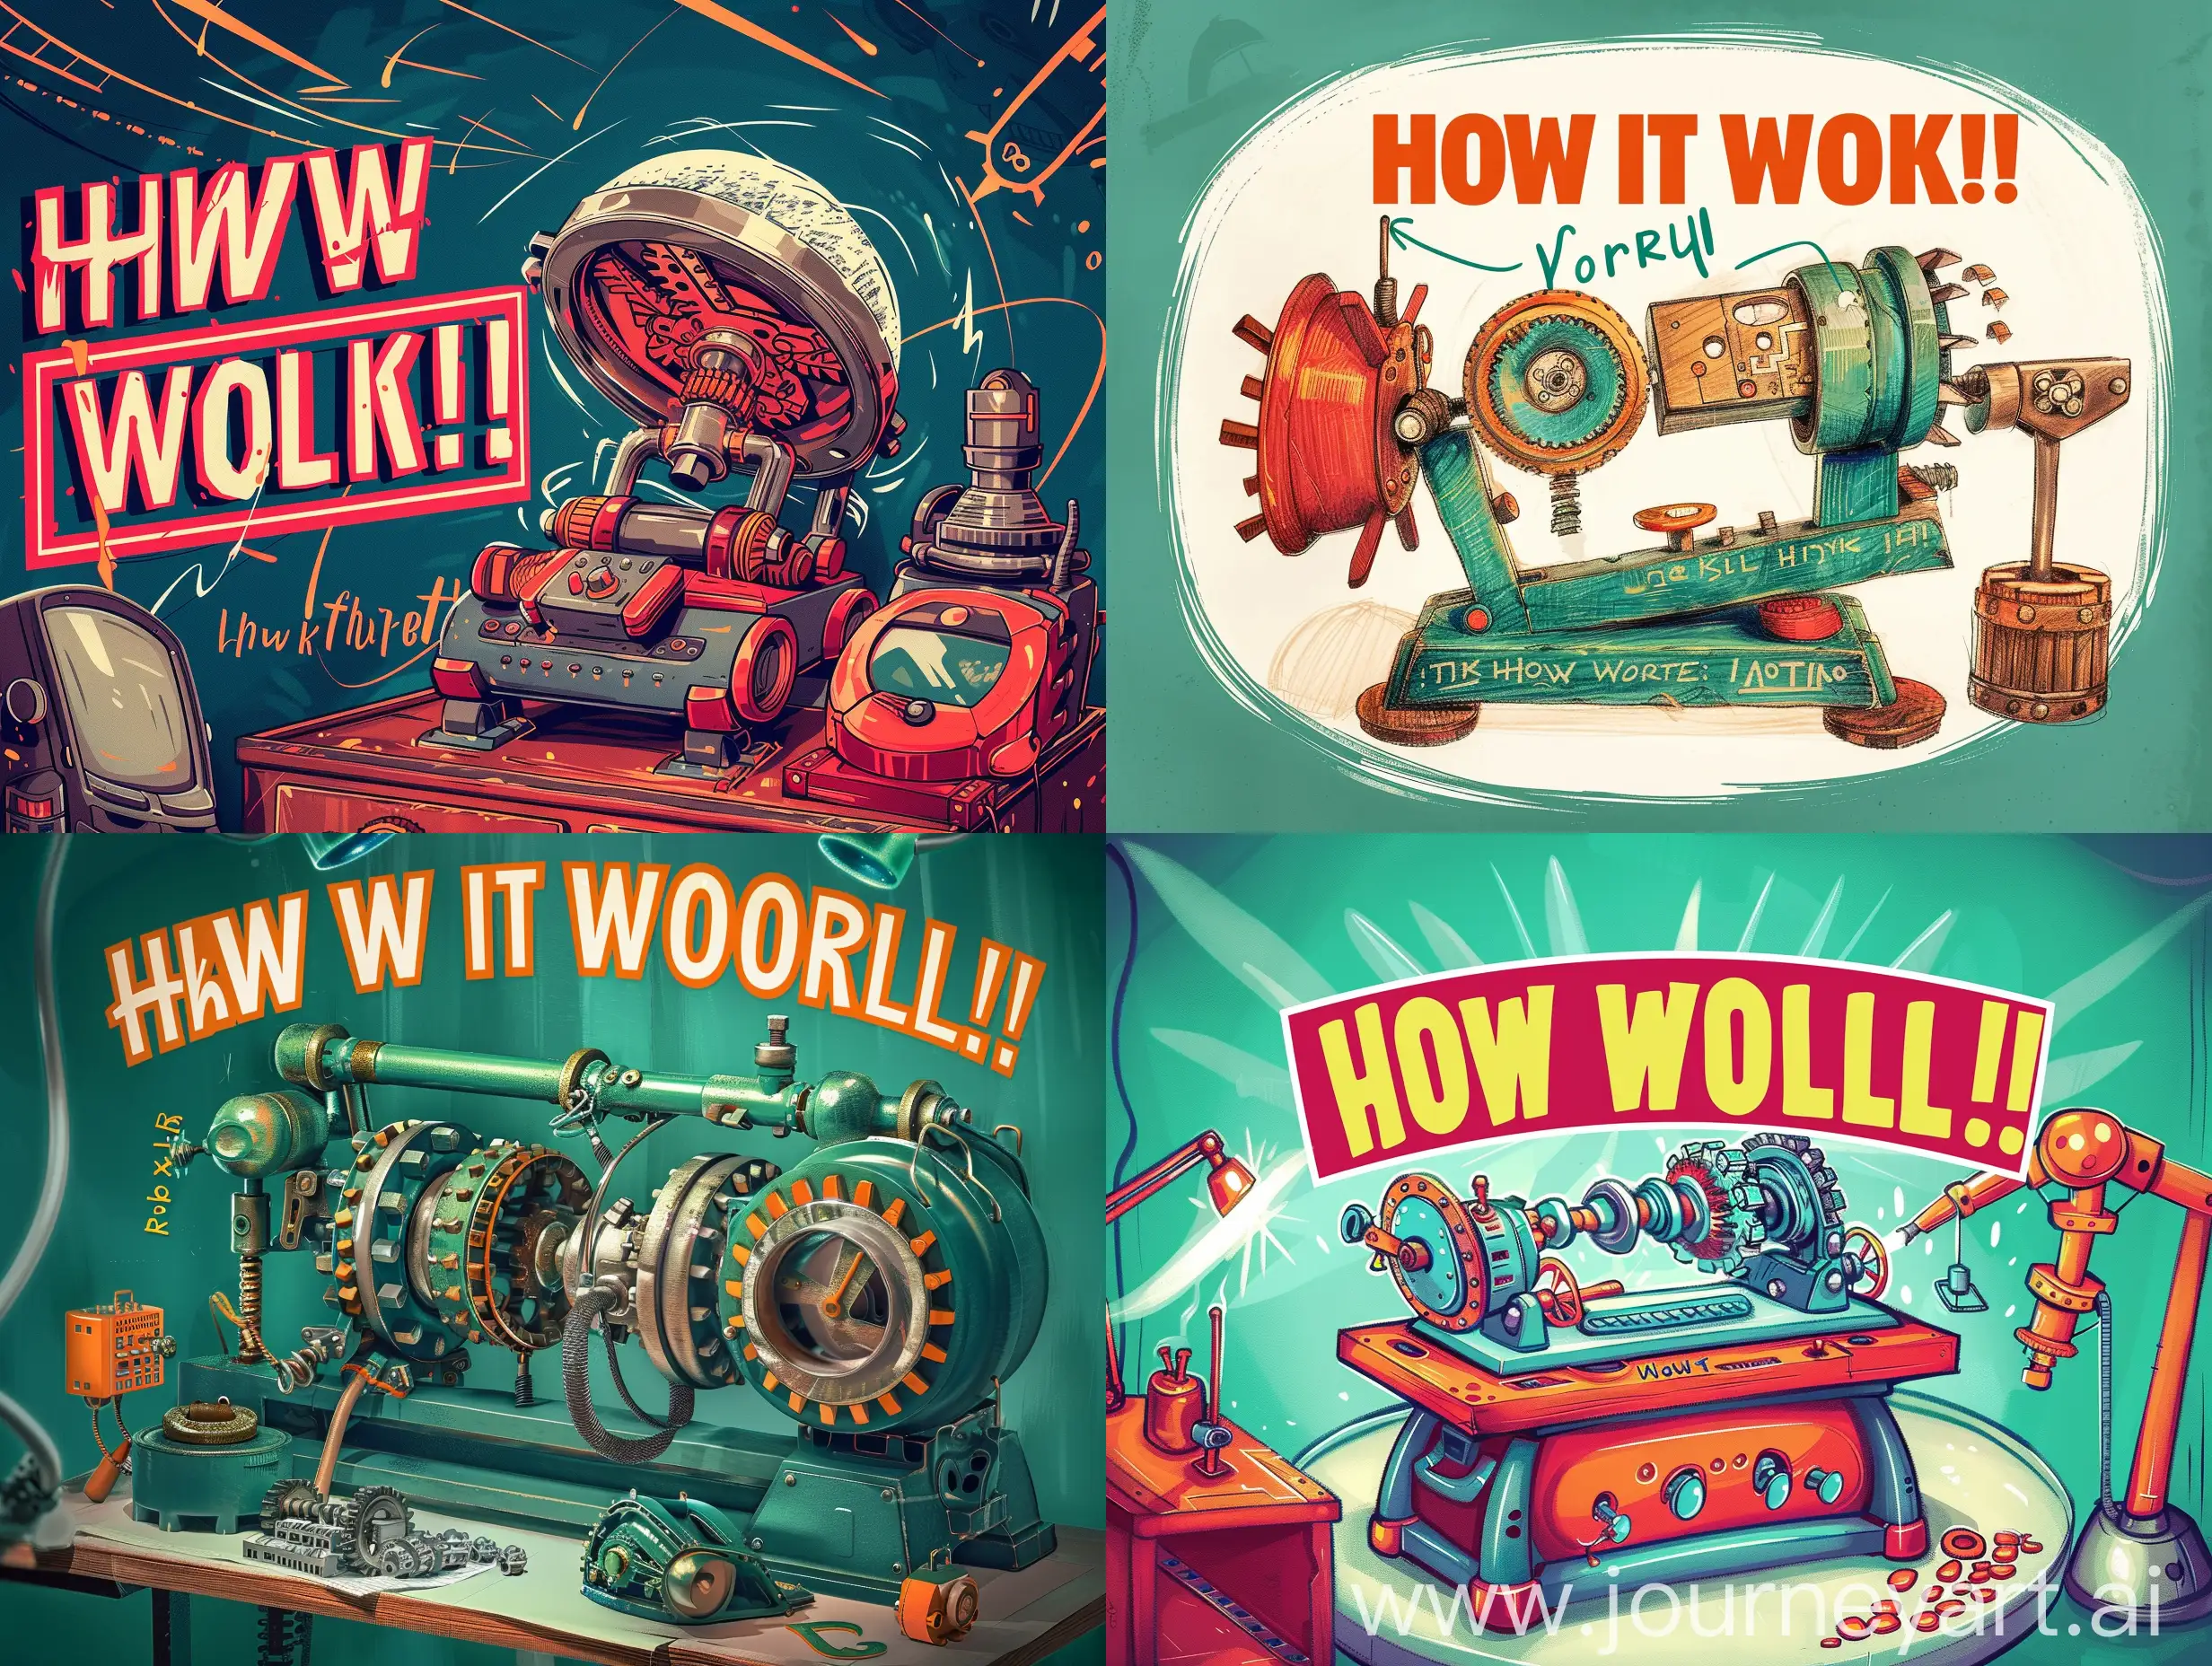 Mechanisms, cover for a children's computer game, the inscription "How does it work!?"